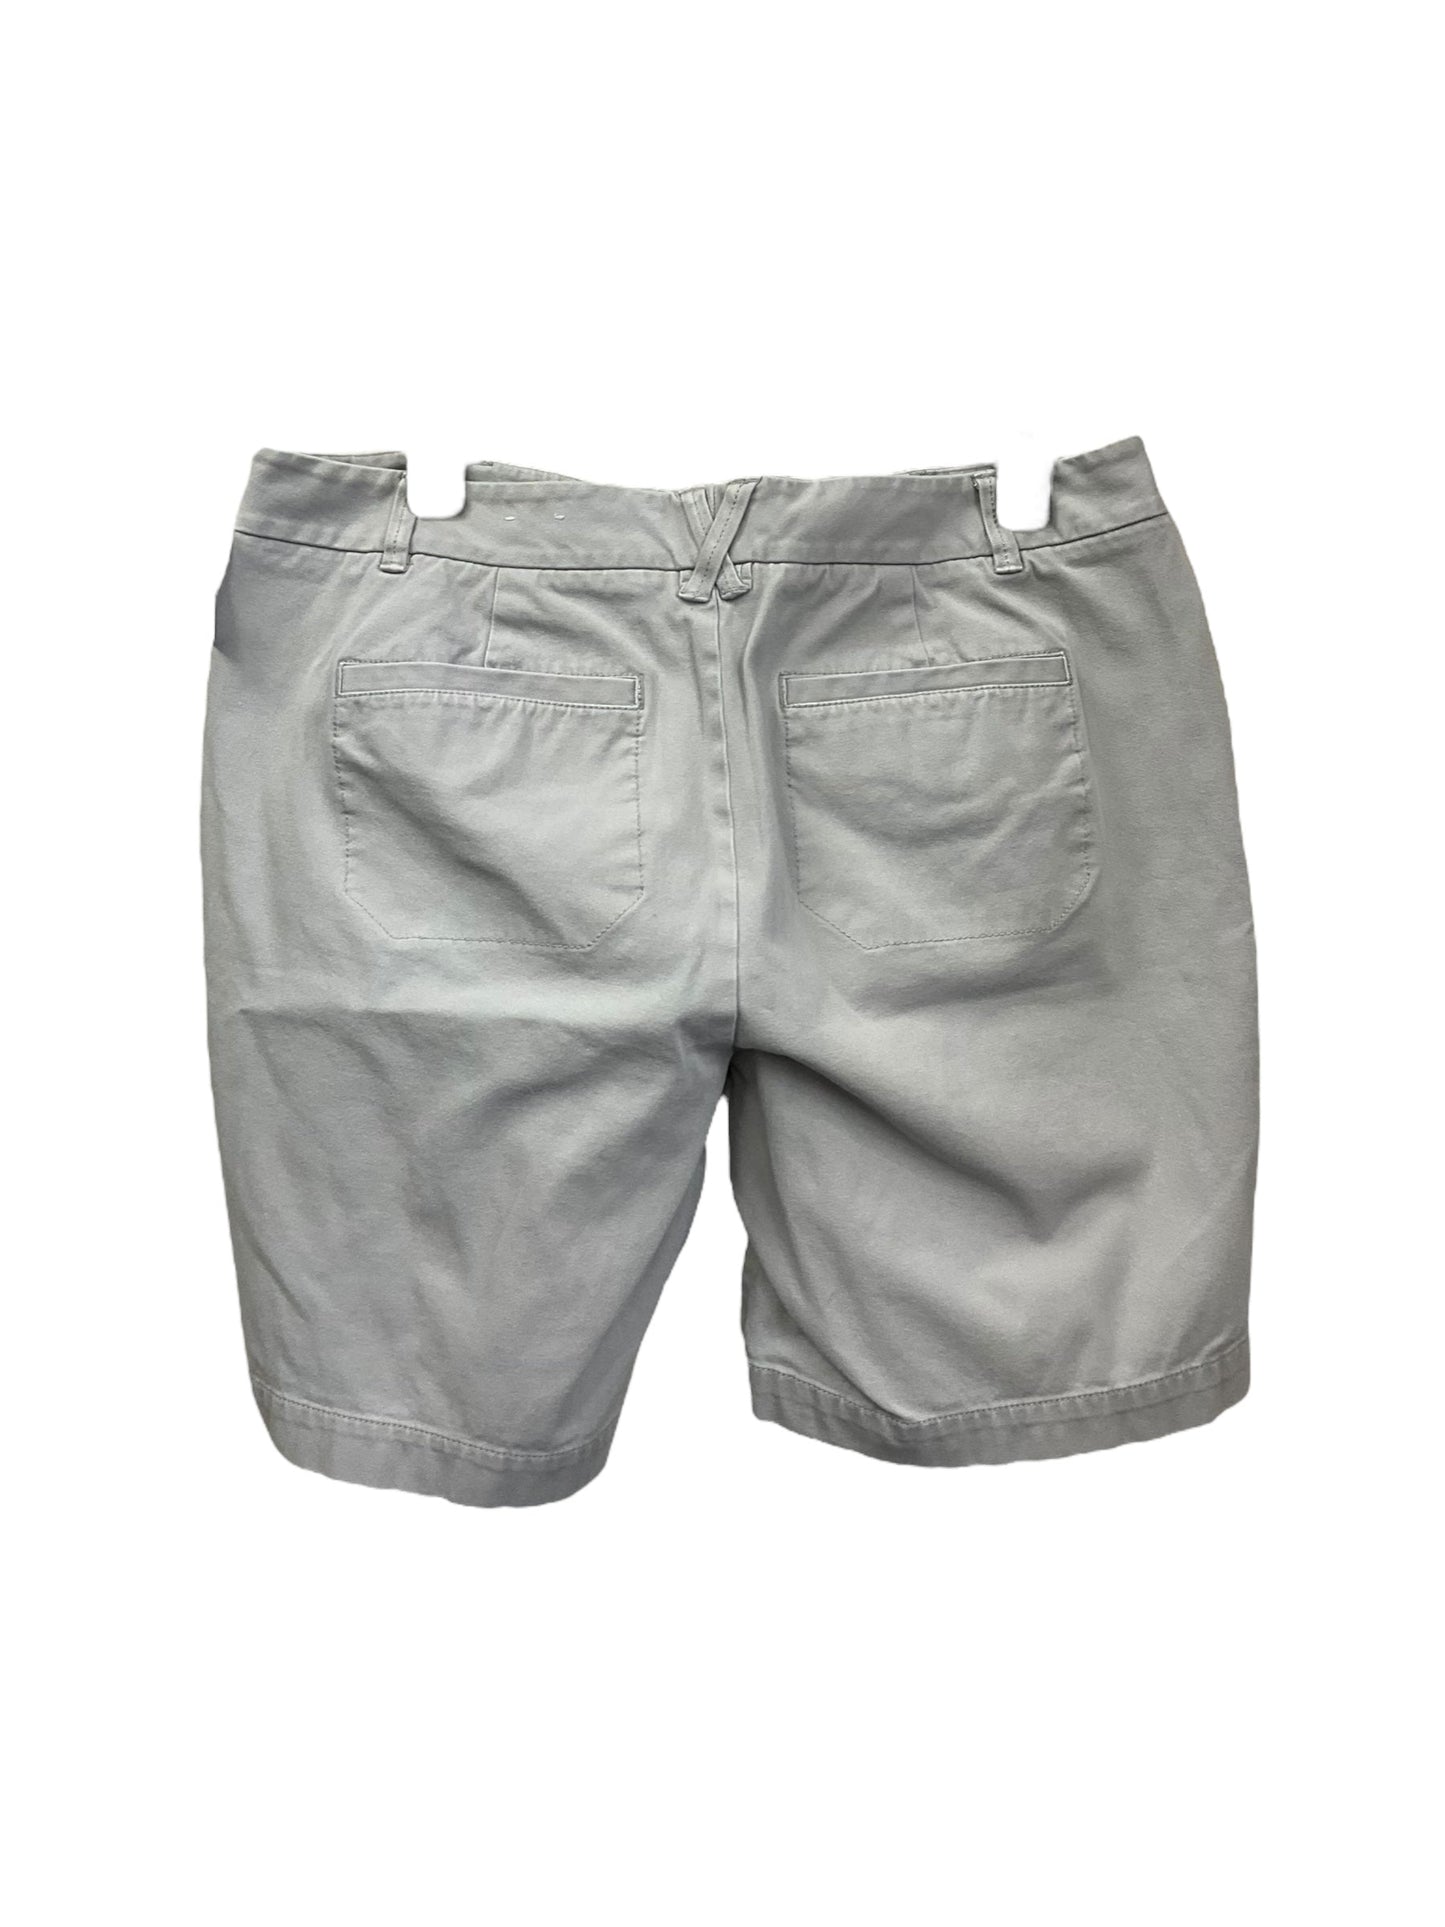 Shorts By Coldwater Creek  Size: 14